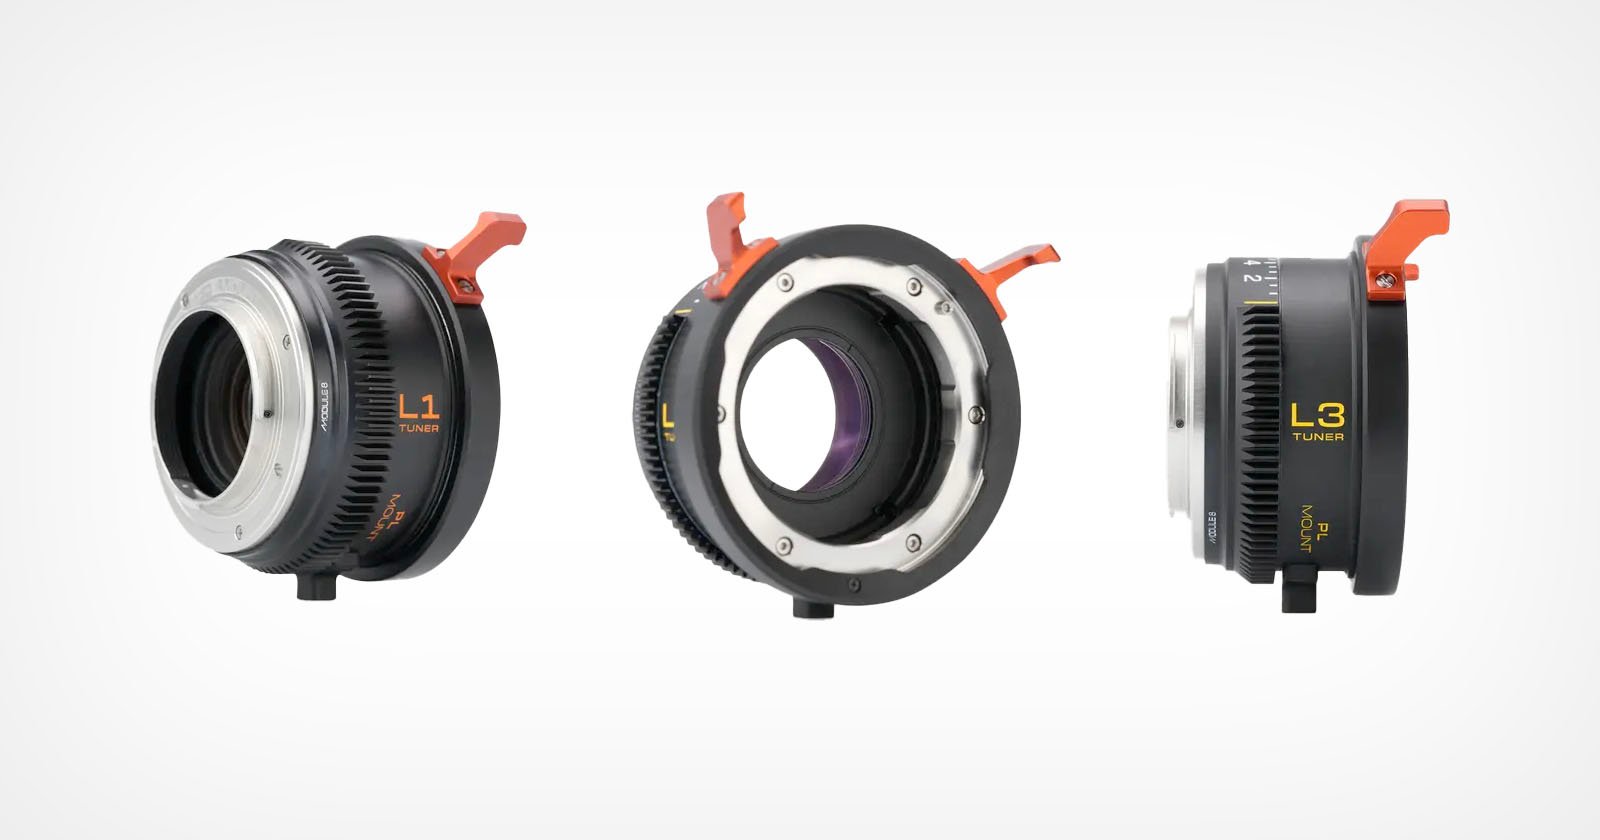  module tuner now available lenses bringing variable 